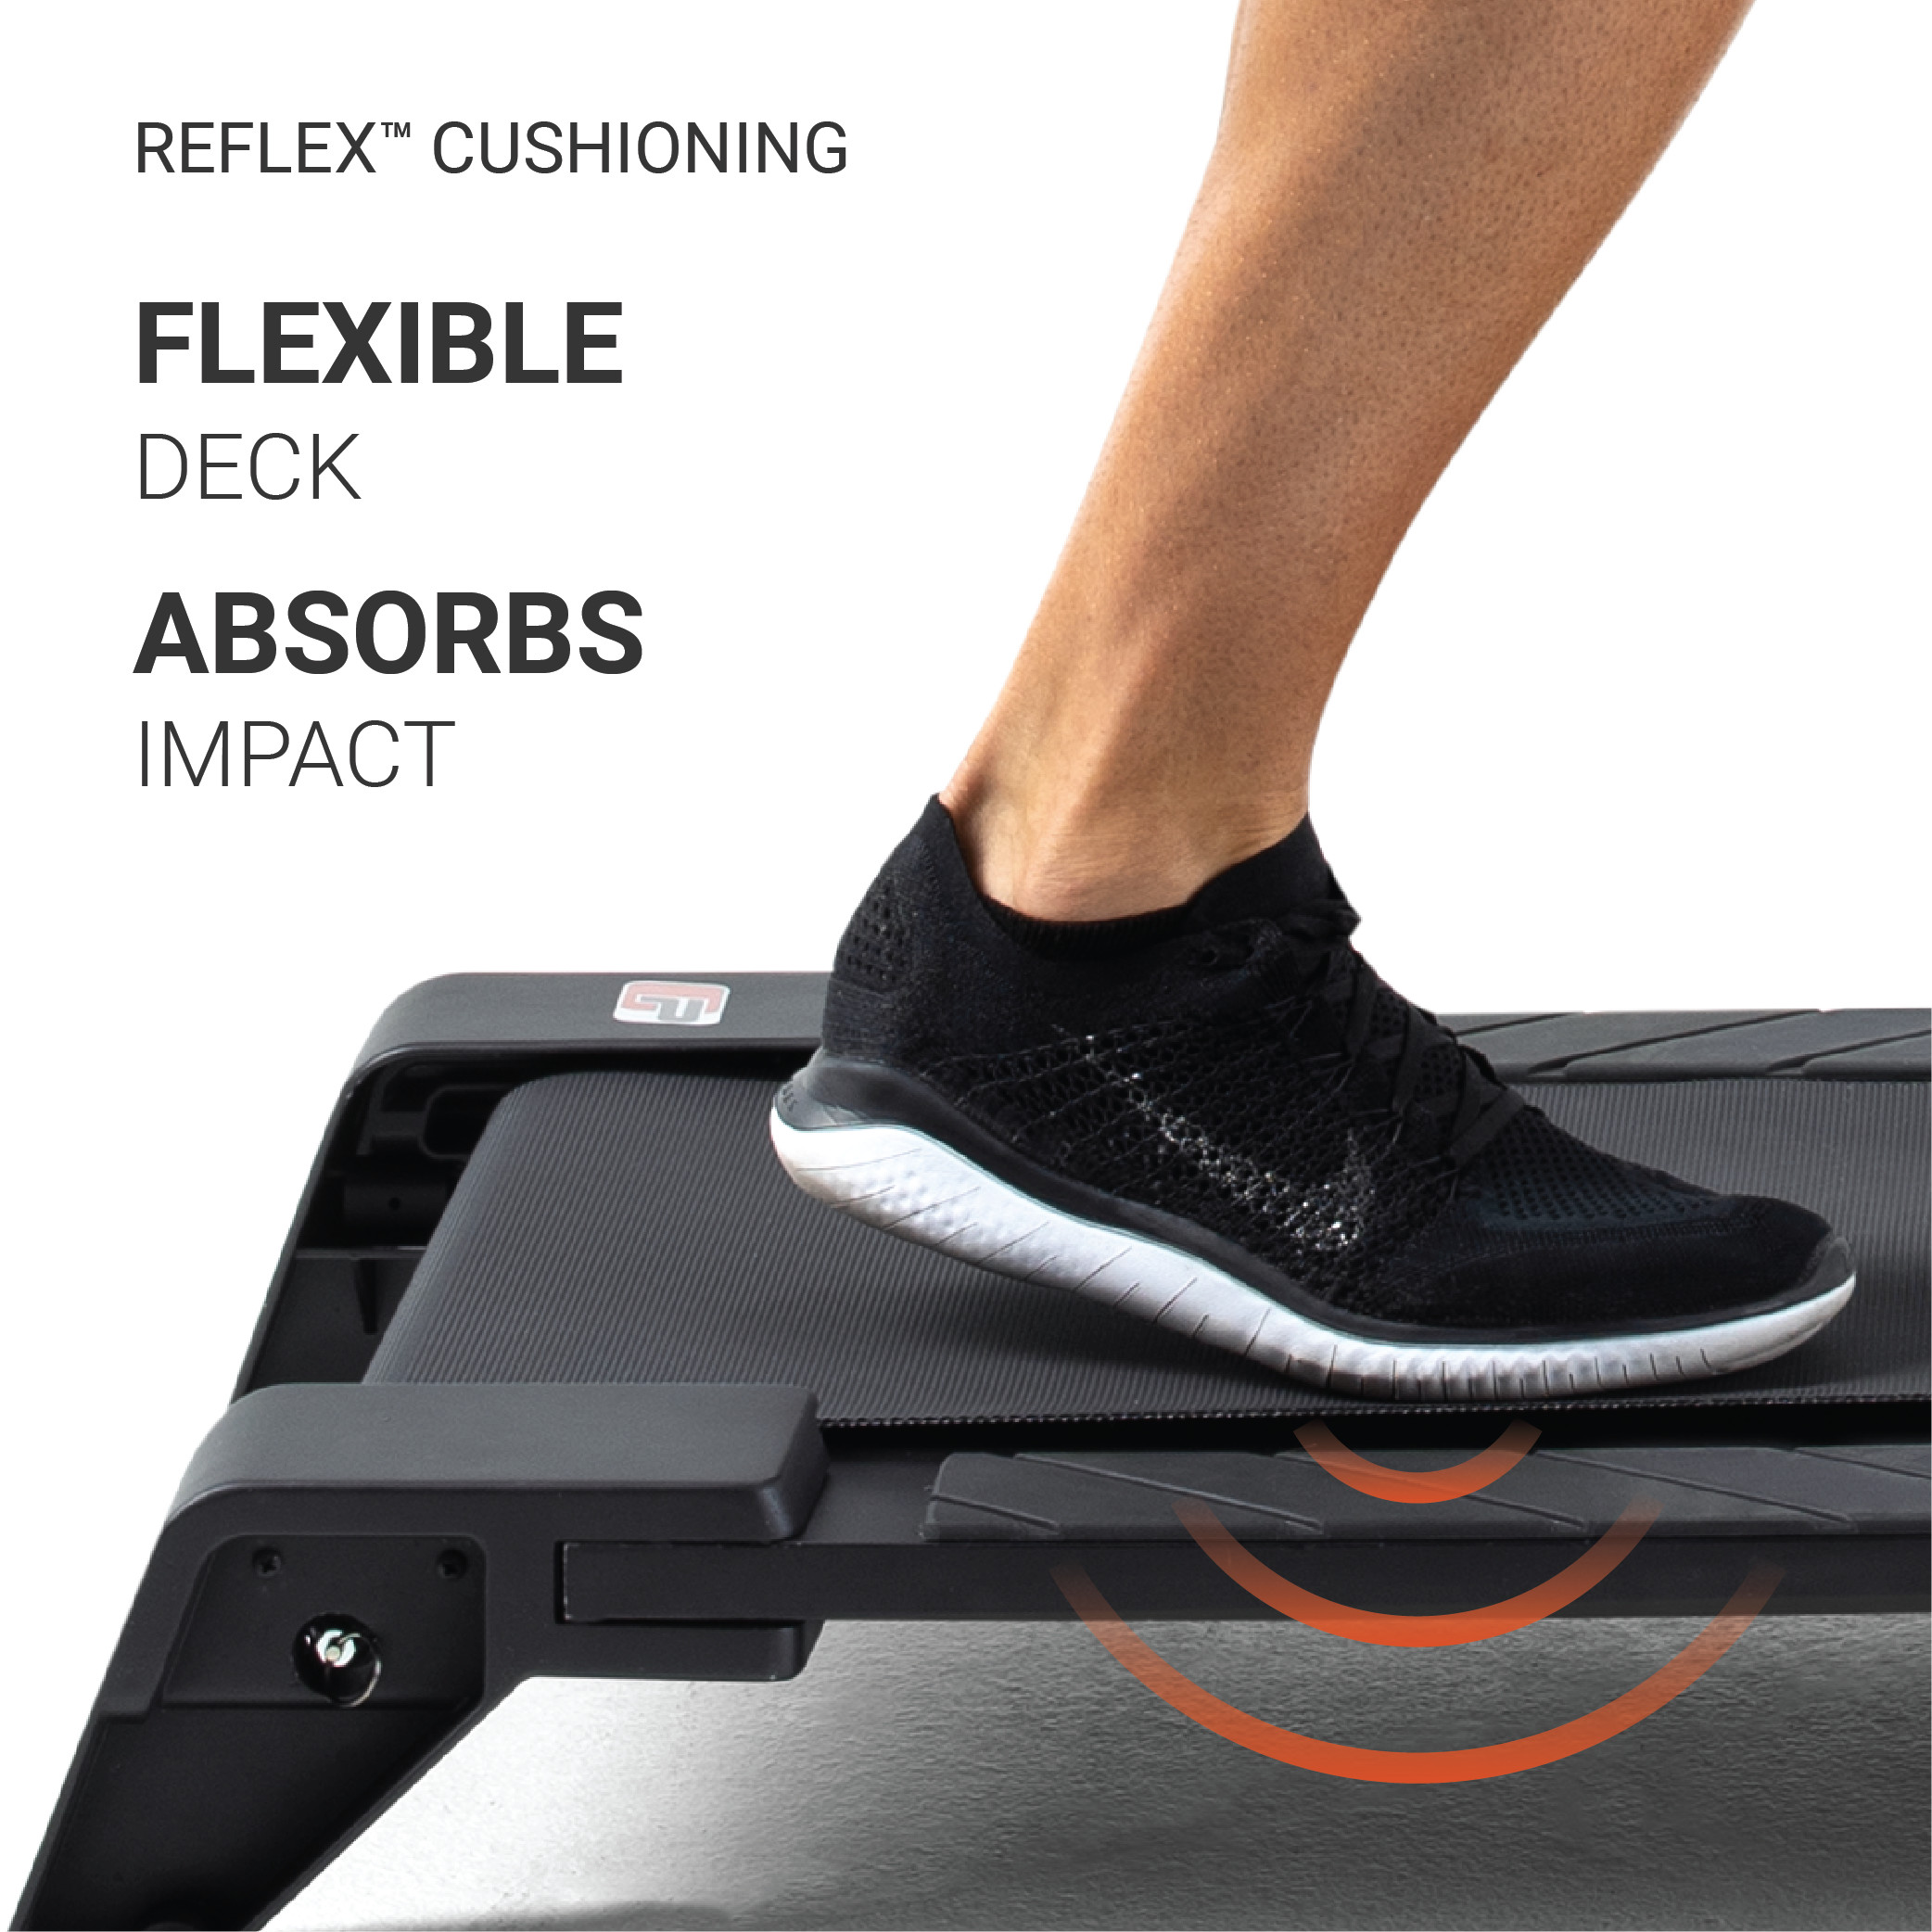 ProForm Crosswalk LT Folding Treadmill with Upper Body Resistance, iFit Bluetooth Enabled - image 5 of 18